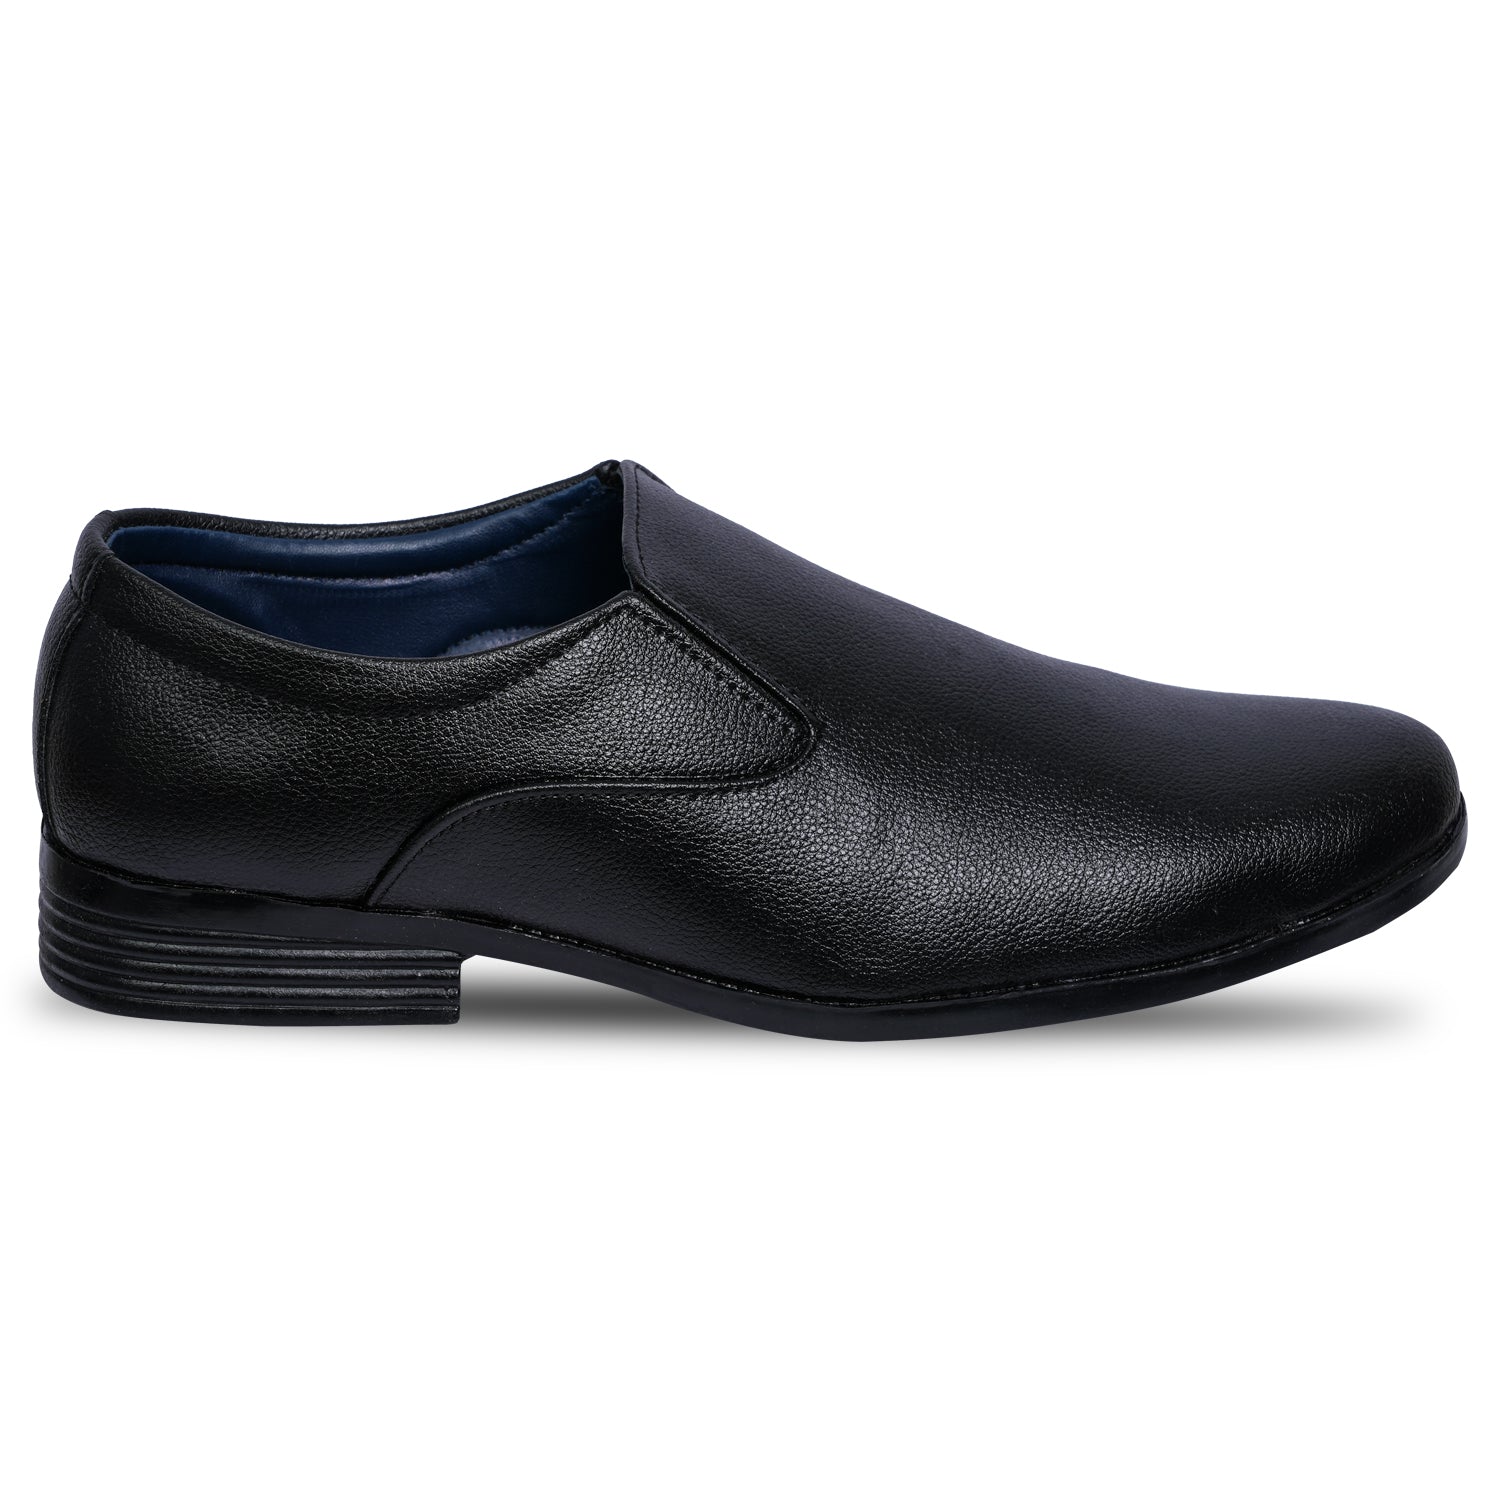 Paragon R2007G Men Formal Shoes | Corporate Office Shoes | Smart &amp; Sleek Design | Comfortable Sole with Cushioning | Daily &amp; Occasion Wear